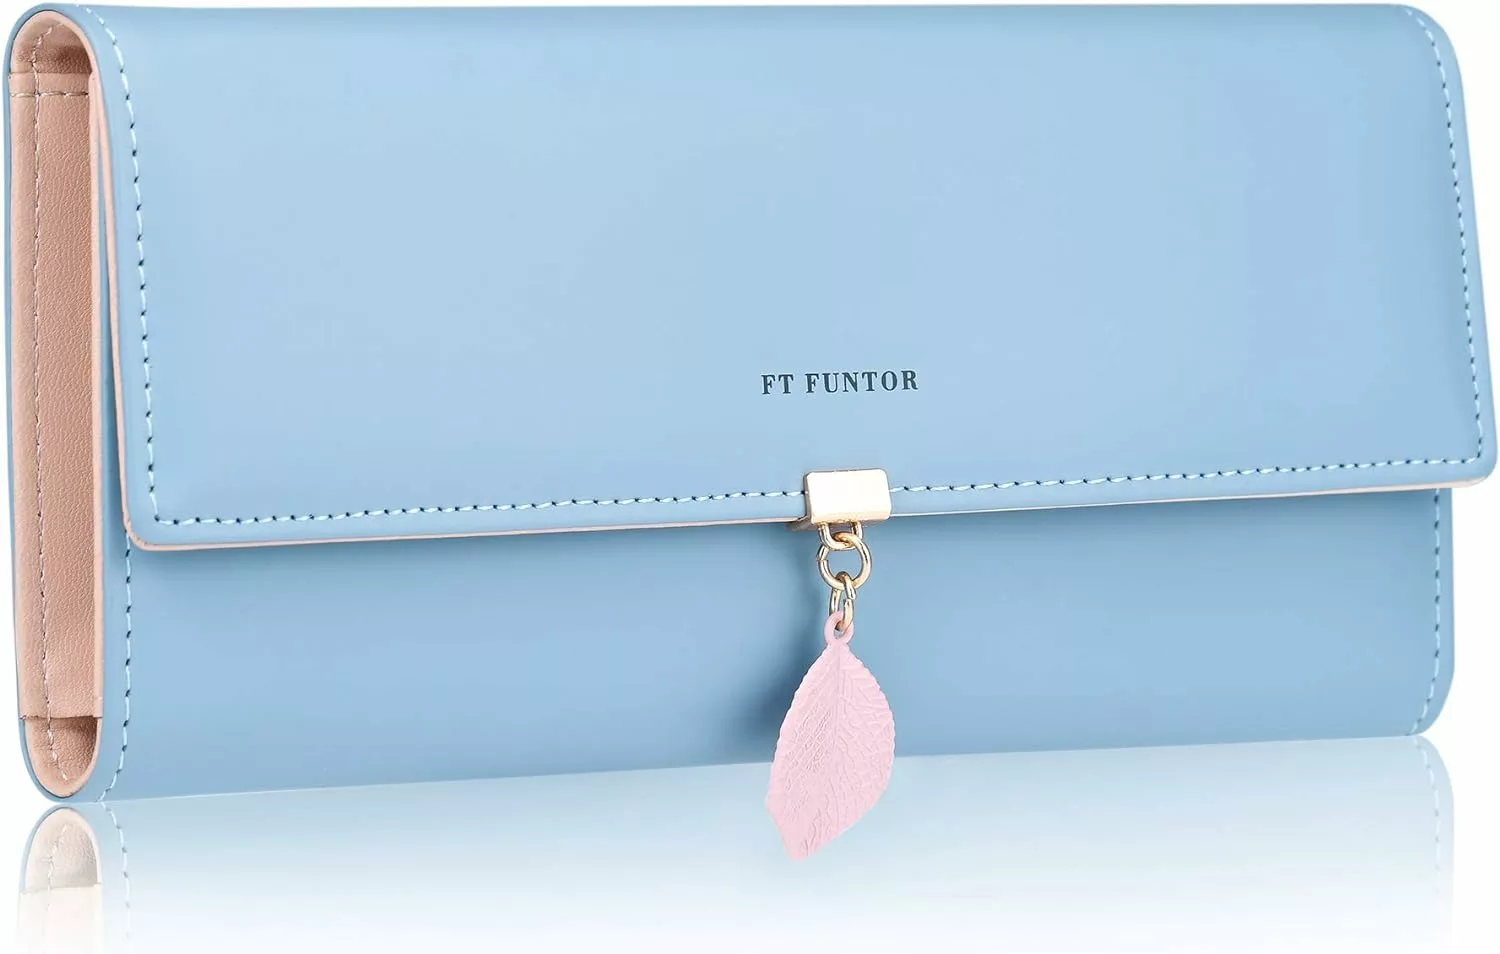 FT FUNTOR PU Leather Wallet for Women RFID Blocking Ladies Leaf Pendant Coin Zipper Long Purse with Multiple Card Slots and Card Holders Phone Pocket (Blue)